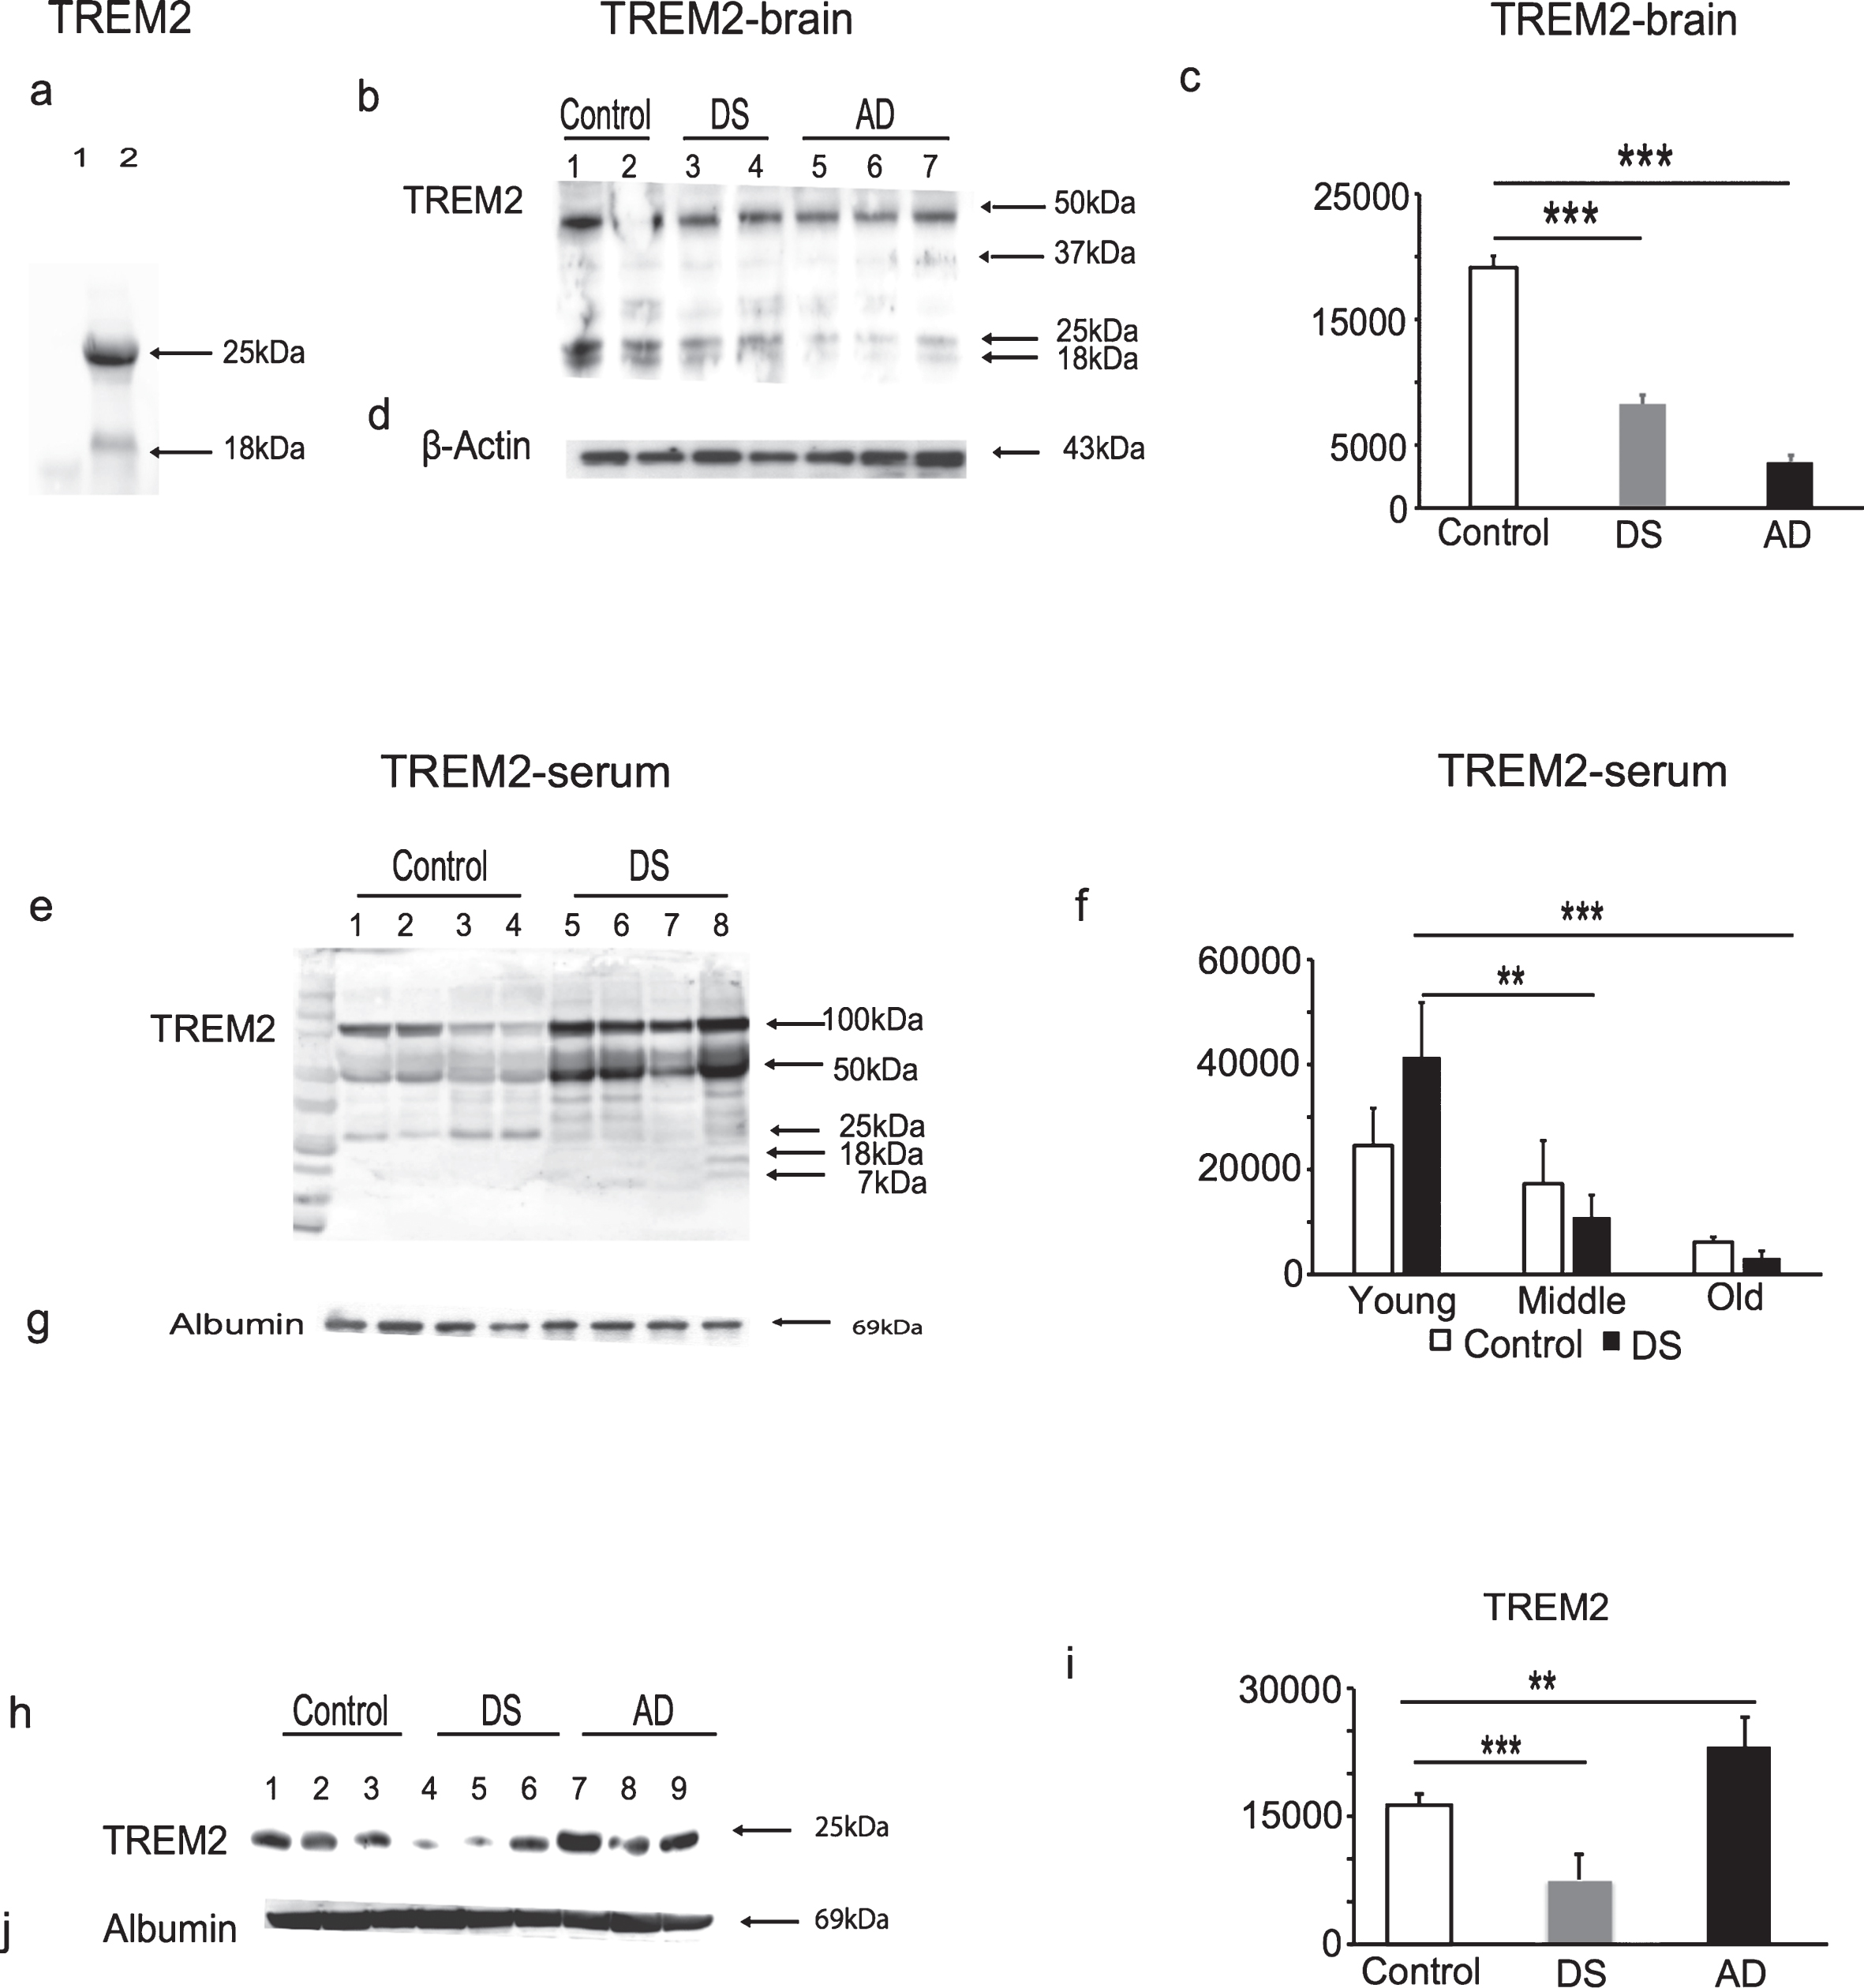 TREM2 protein levels declined with Alzheimer’s diseases progression in Down syndrome. To validate the TREM2 antibody (ab201621), the HEK293 cell line was transfected to overexpress human TREM2, cell lysates were analyzed by WB. The antibody recognized a band of 25 kDa and ∼18 kDa in the TREM2 overexpressing HEK293 cell lysate, whereas in control HEK293 cell lysate no band was seen (a). The WB analyses performed on postmortem human brain tissue (superior frontal cortex) showed that TREM2 levels were highest in controls, significantly decreased in DS and lowest in AD brains (b & c, p < 0.0005). TREM2 serum levels were significantly increased in young DS, lower in middle age, and lowest in the older subjects (e & f, p < 0.001 between older versus younger DS). Similarly, serum TREM2 levels were lower in AD (n = 25), compared with age-matched controls (n = 25) and lowest in DS (h & i, p < 0.001). β-actin and human serum albumin were used as positive controls for brain tissue and serum samples, respectively (d, g, & j). Bonferroni-corrected Student’s t-tests shown; (n = 8–25 per group). Error bars indicate SEM. *p < 0.05, **p < 0.01, ***p < 0.001, one-way ANOVA.